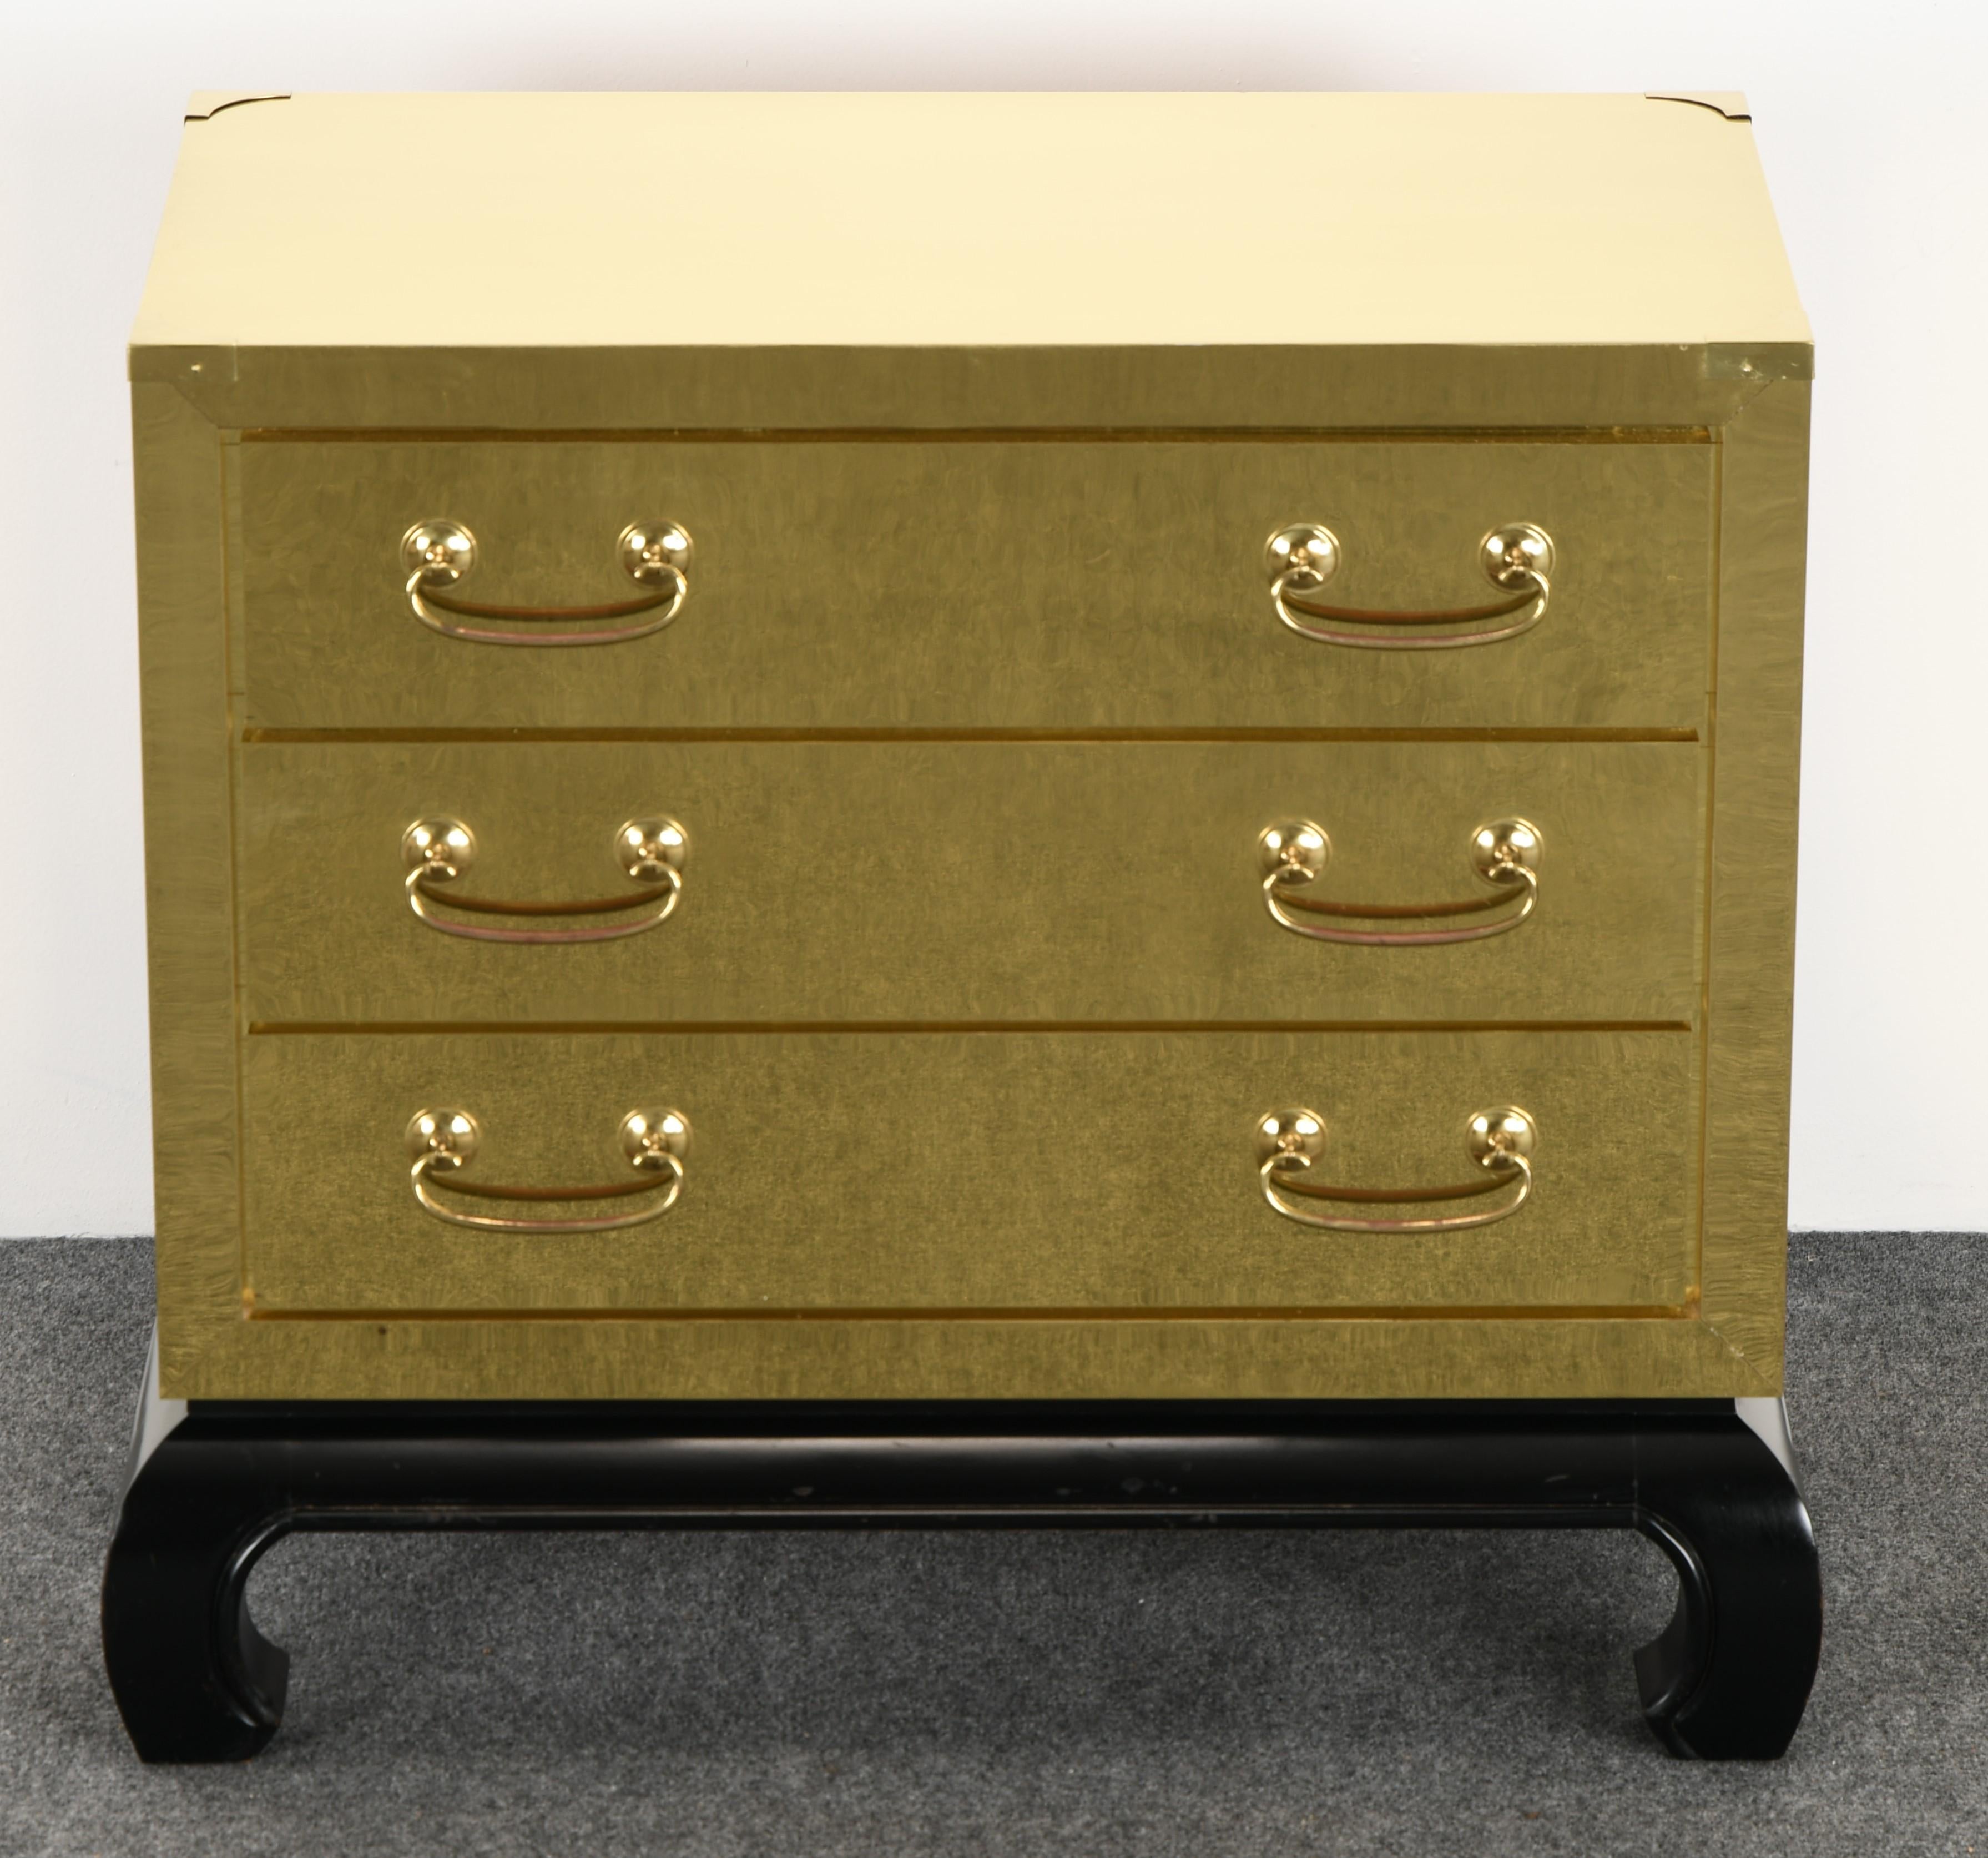 A brass-clad chest in the manner of Sarried Ltd, Spain, 1960s. This chest is in beautiful condition and structurally sound. Accented with a black painted scroll foot. The drawers pullout / pull-out smoothly. Some very minute dings as shown in images